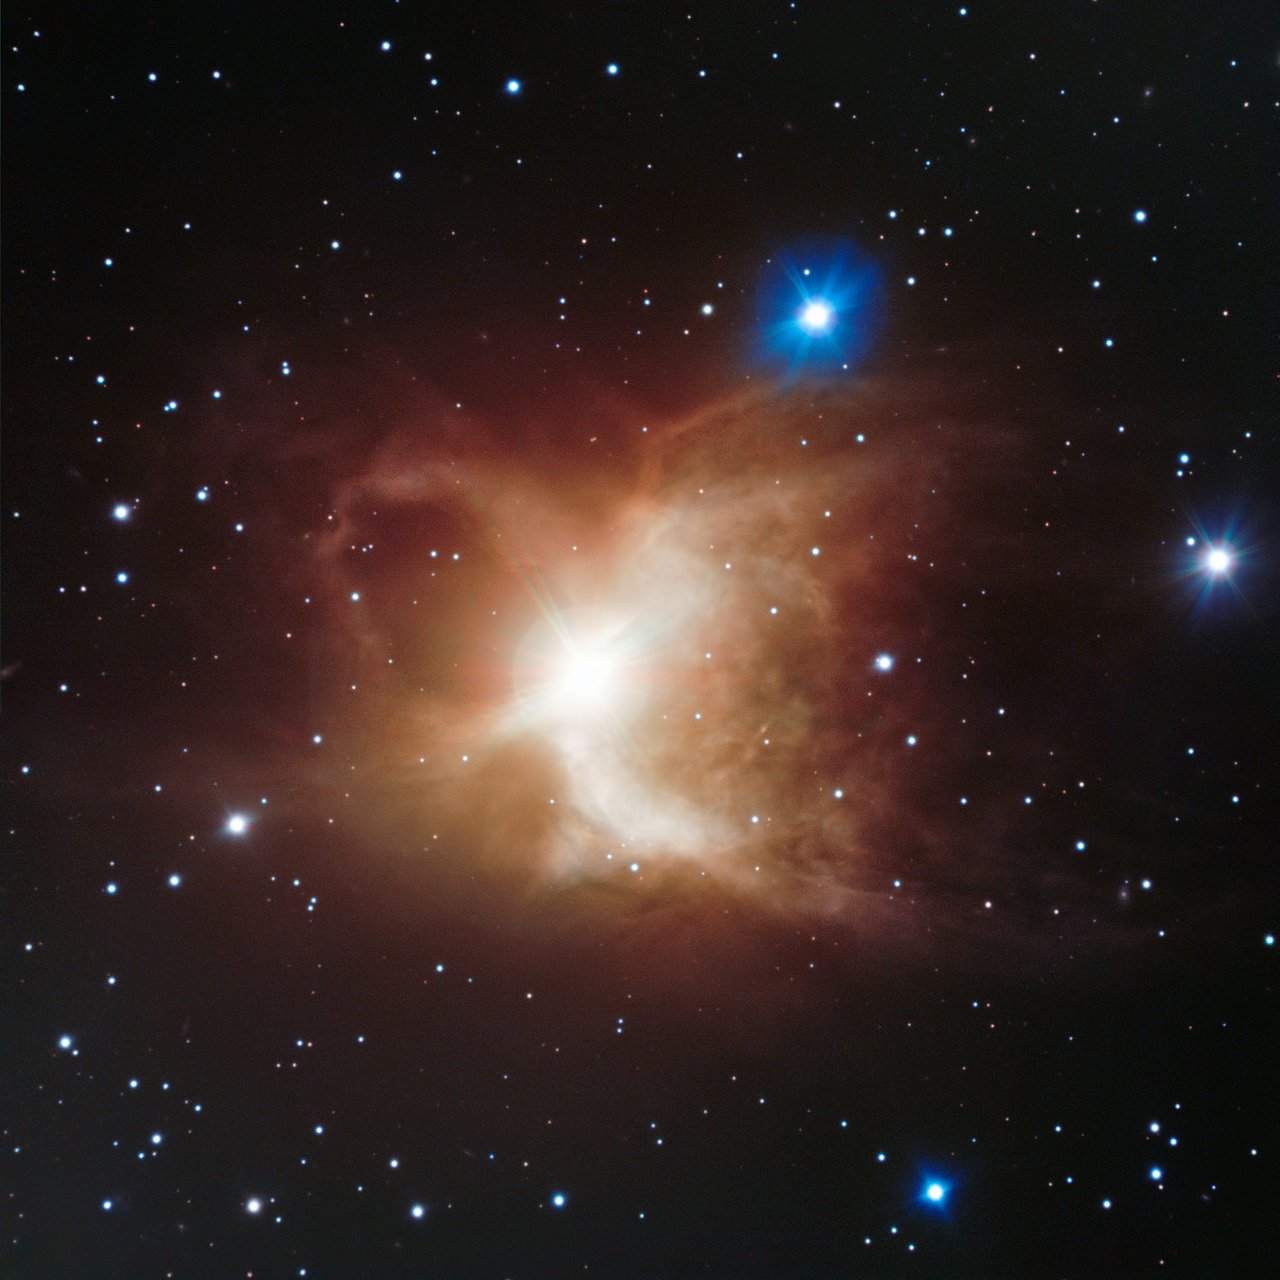 The Toby Jug Nebula as seen with ESO's Very Large Telescope